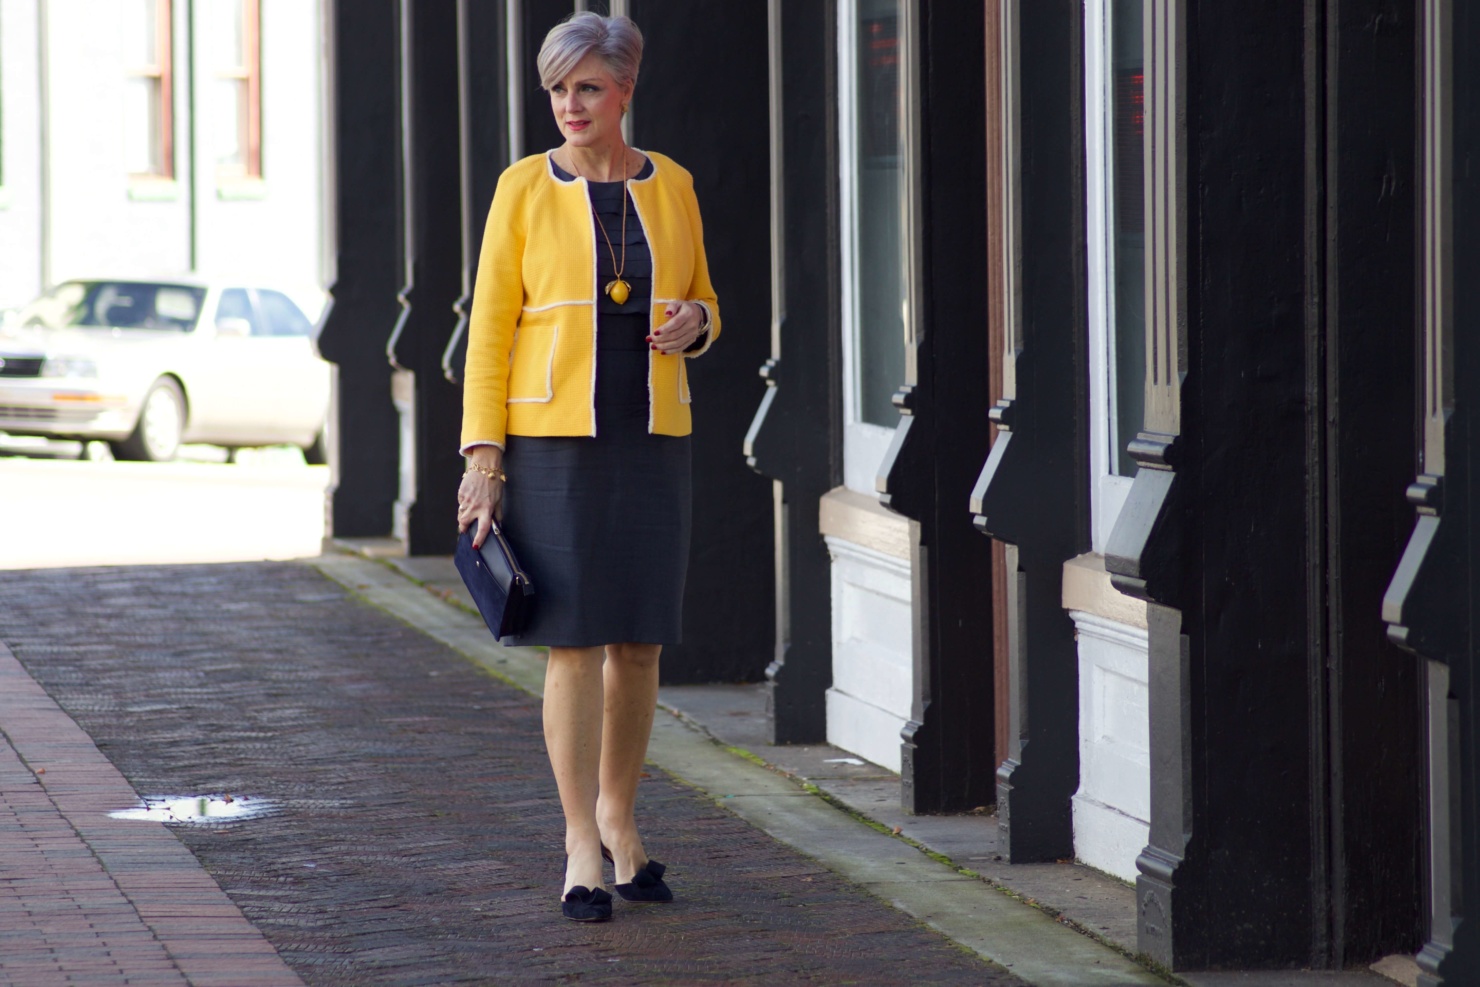 beth from Style at a Certain Age wears a navy blue sheath dress, Boden yellow jacket, navy suede shoes, Tory Burch lemon locket